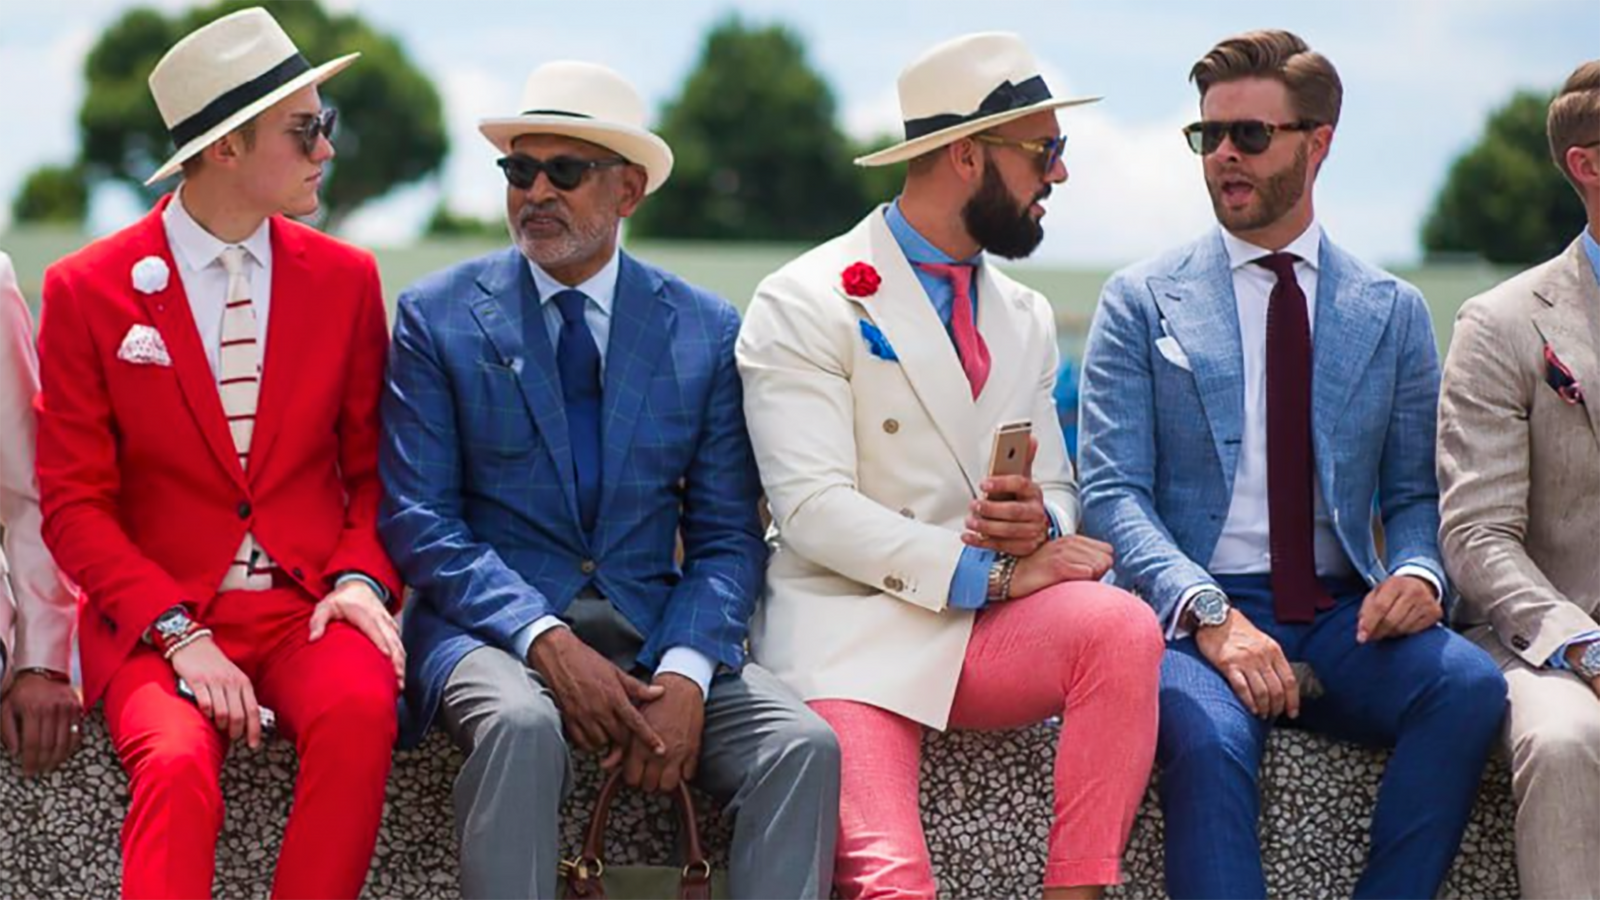 The Complete Guide to Men’s Fashion for Derby Season Art of The Gentleman